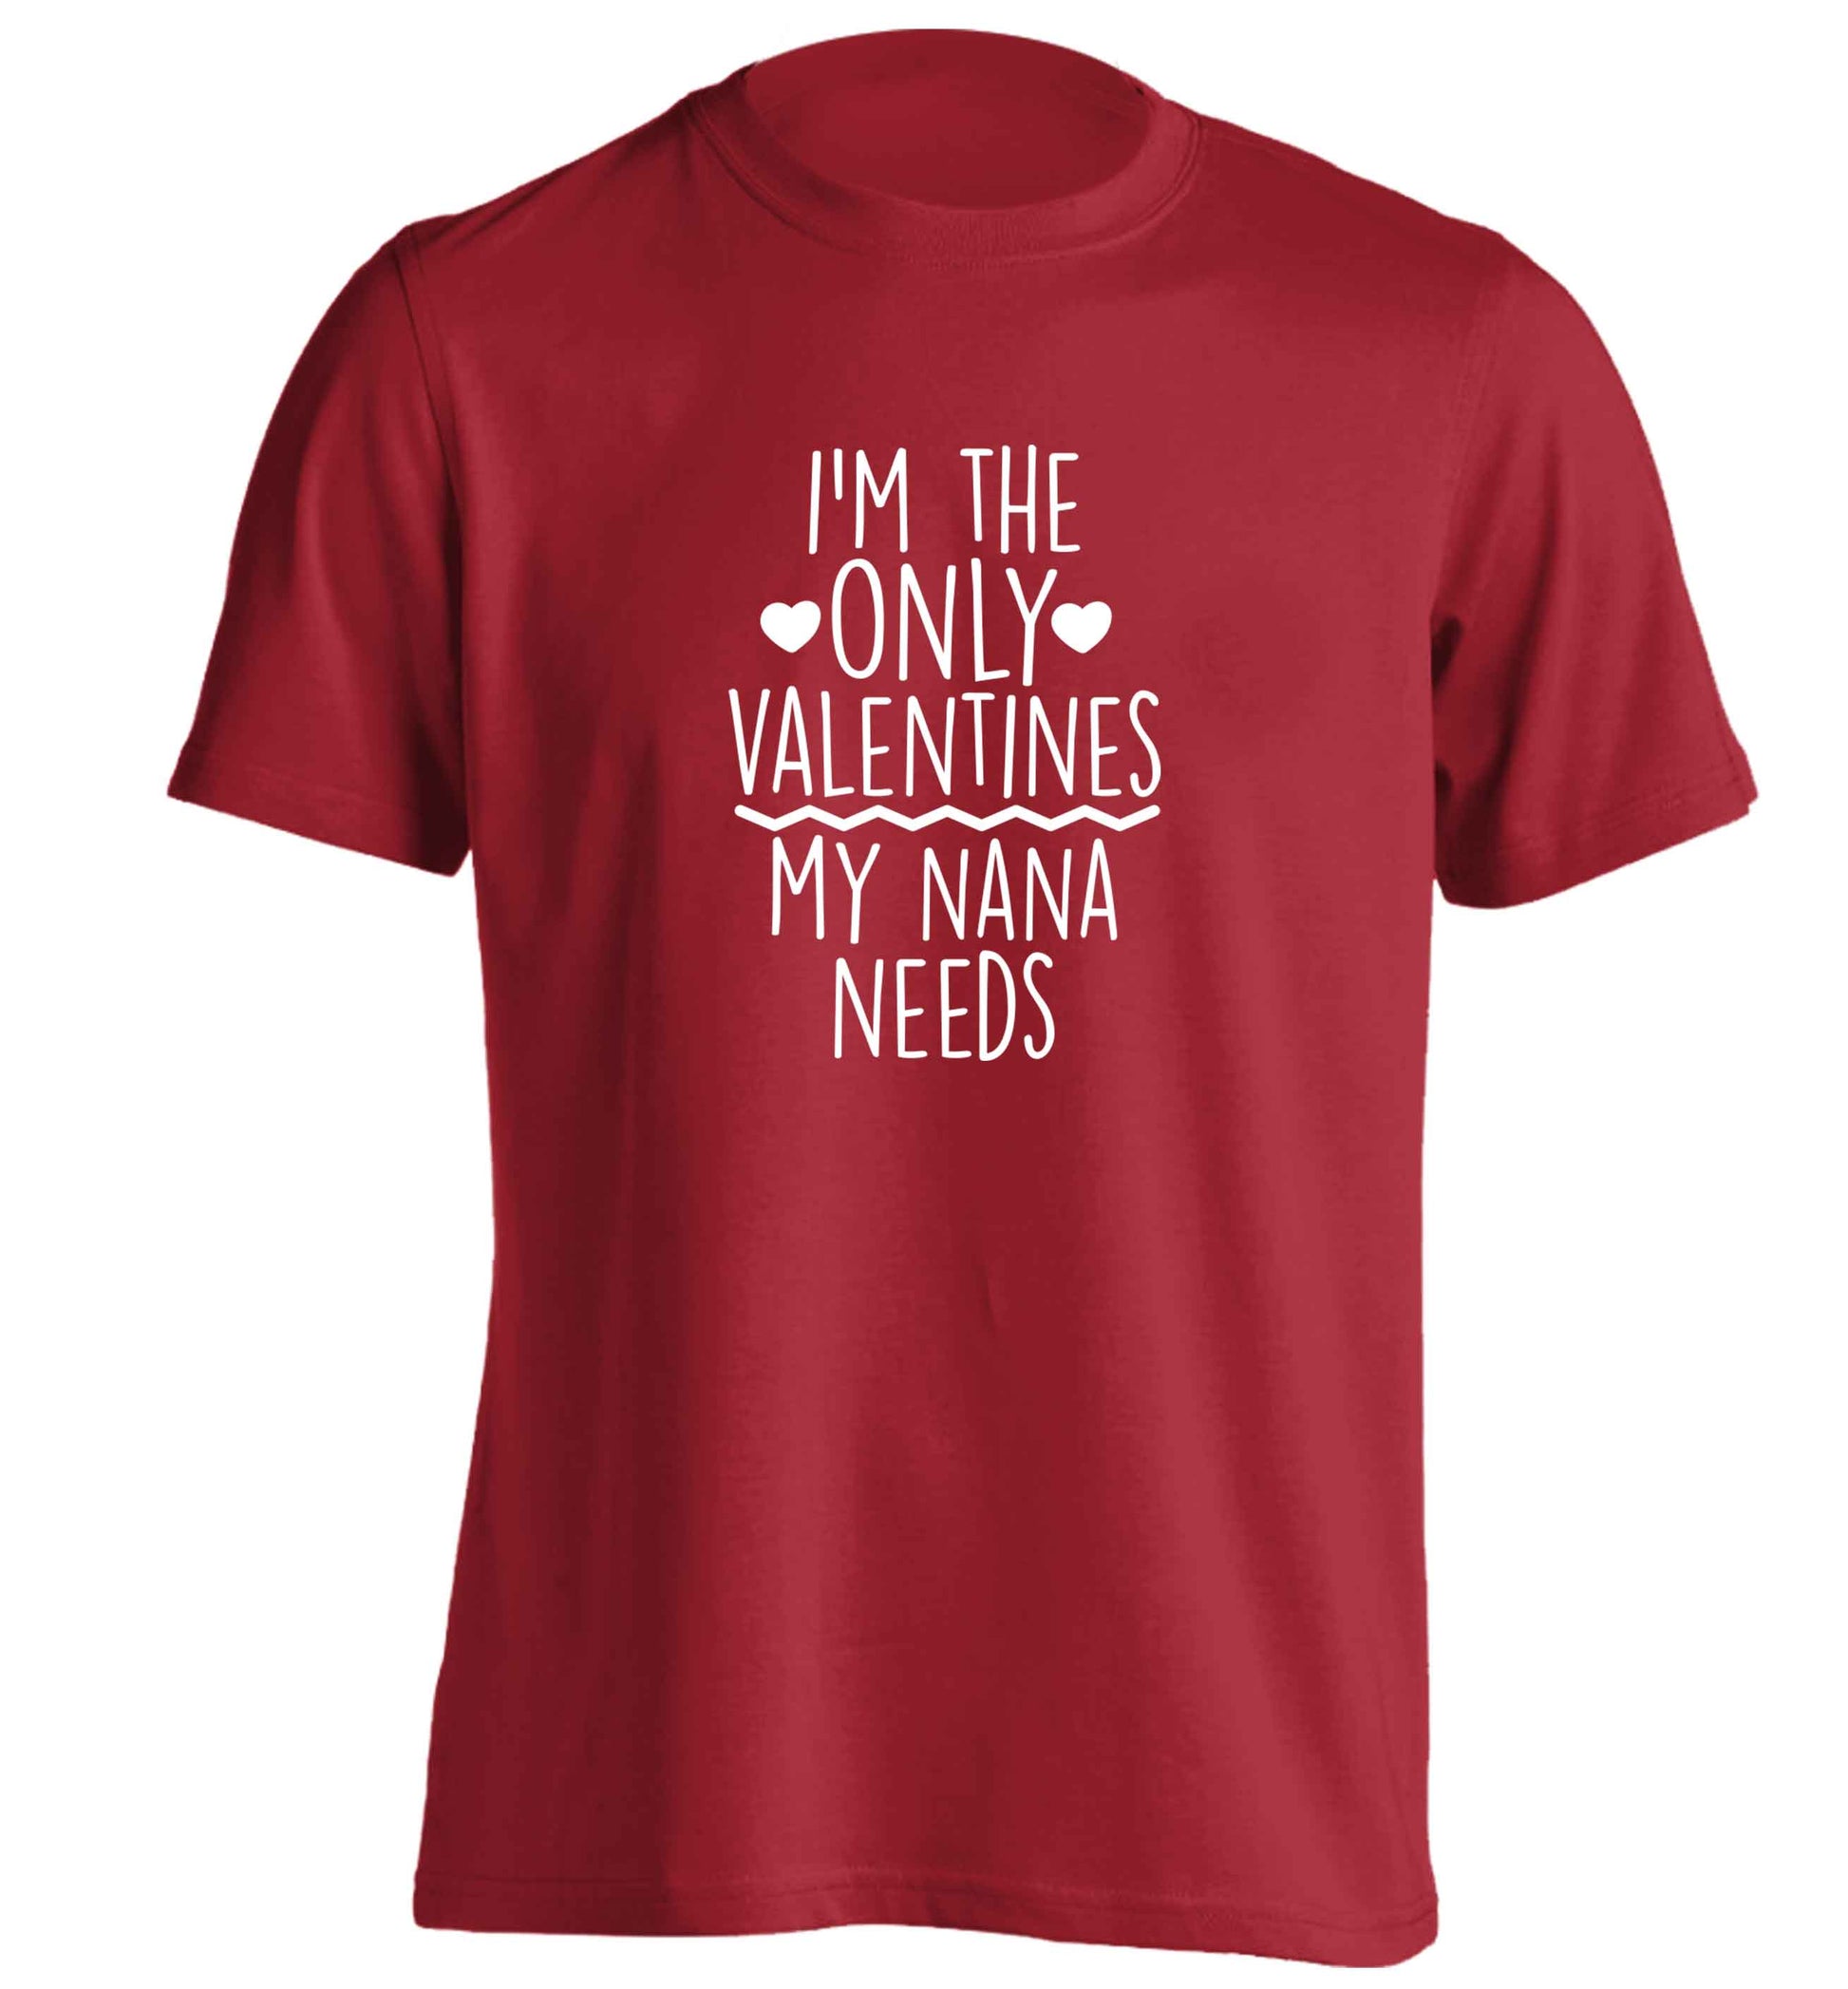 I'm the only valentines my nana needs adults unisex red Tshirt 2XL